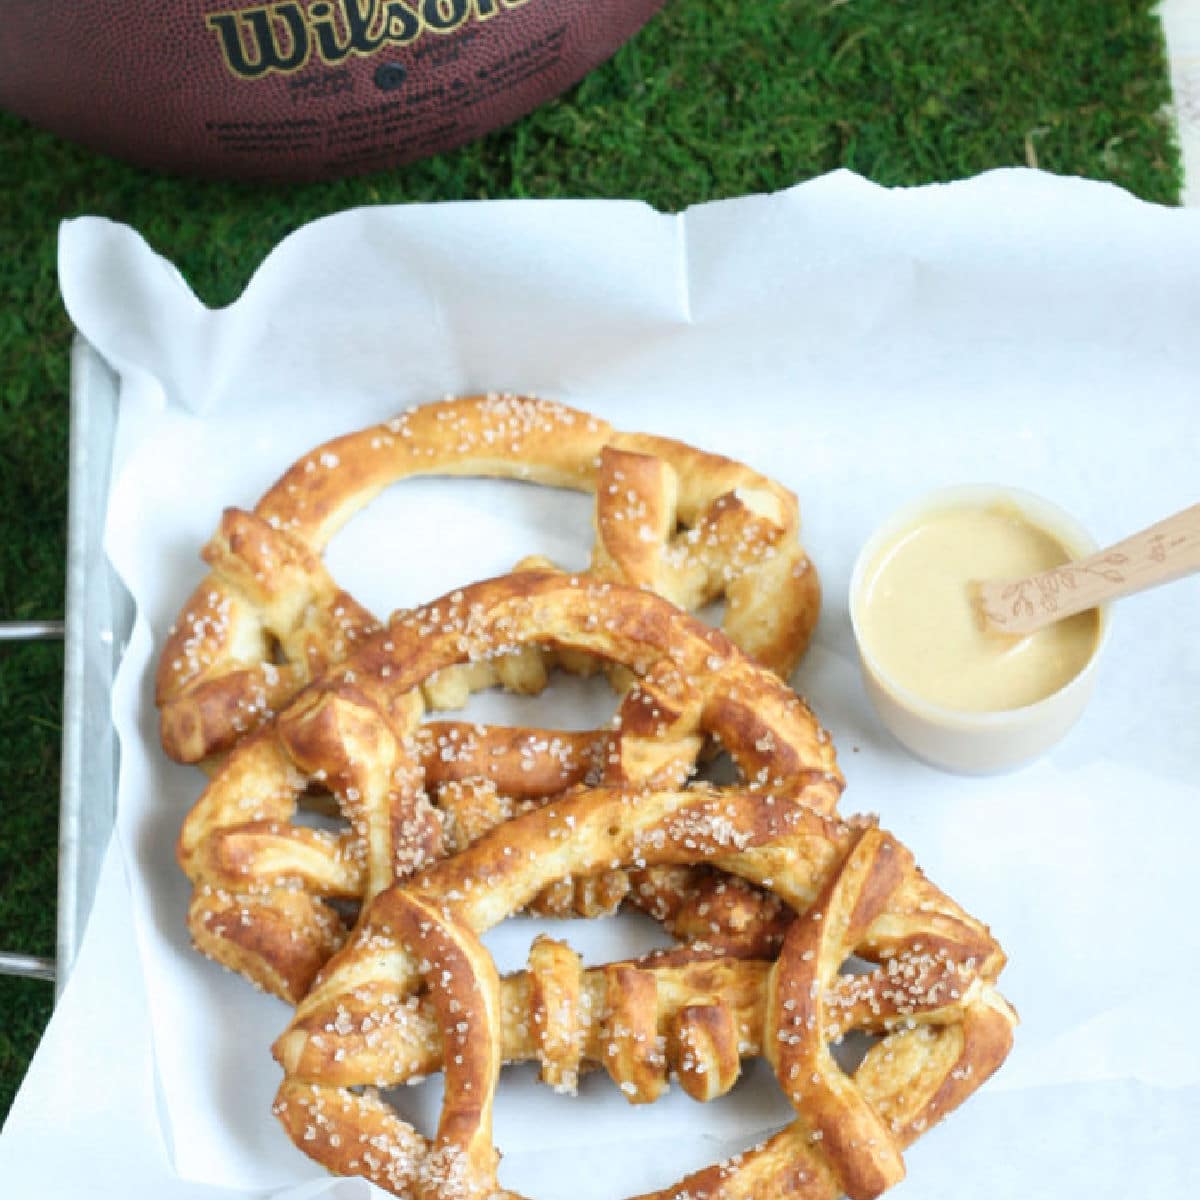 3 football shaped pretzels on a platter with a dip next to it